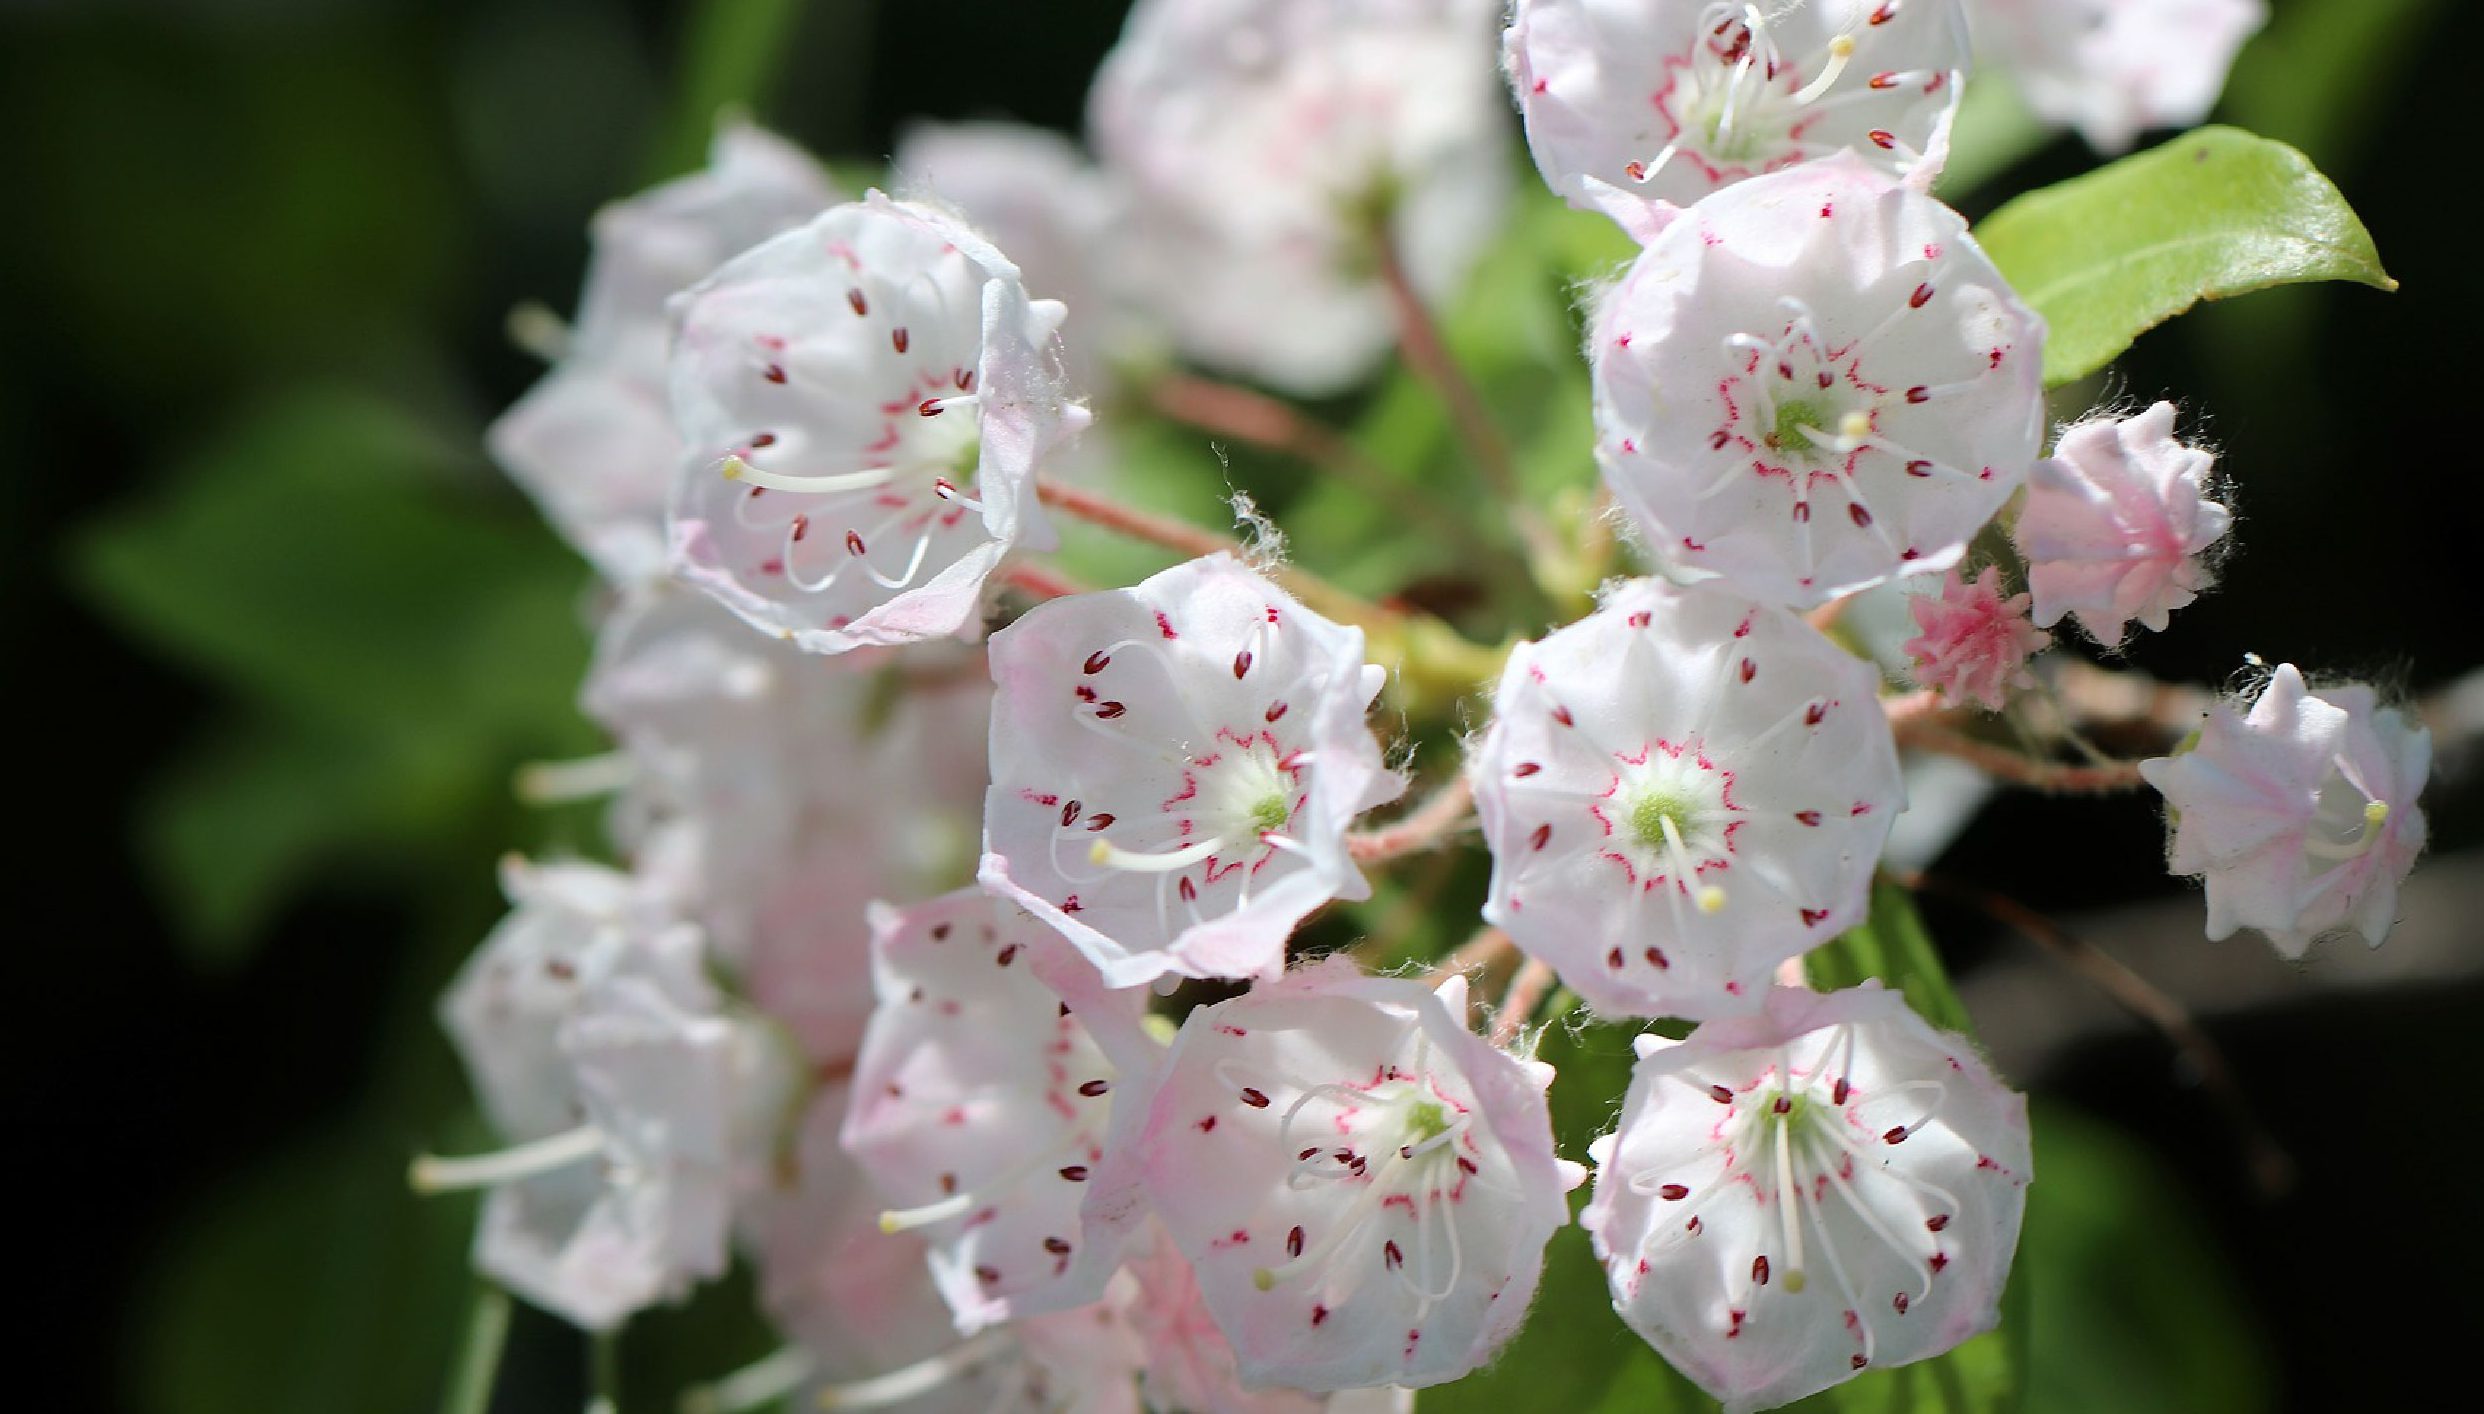 An up close photograph of the Mountain Laurel - a white, pink flower.